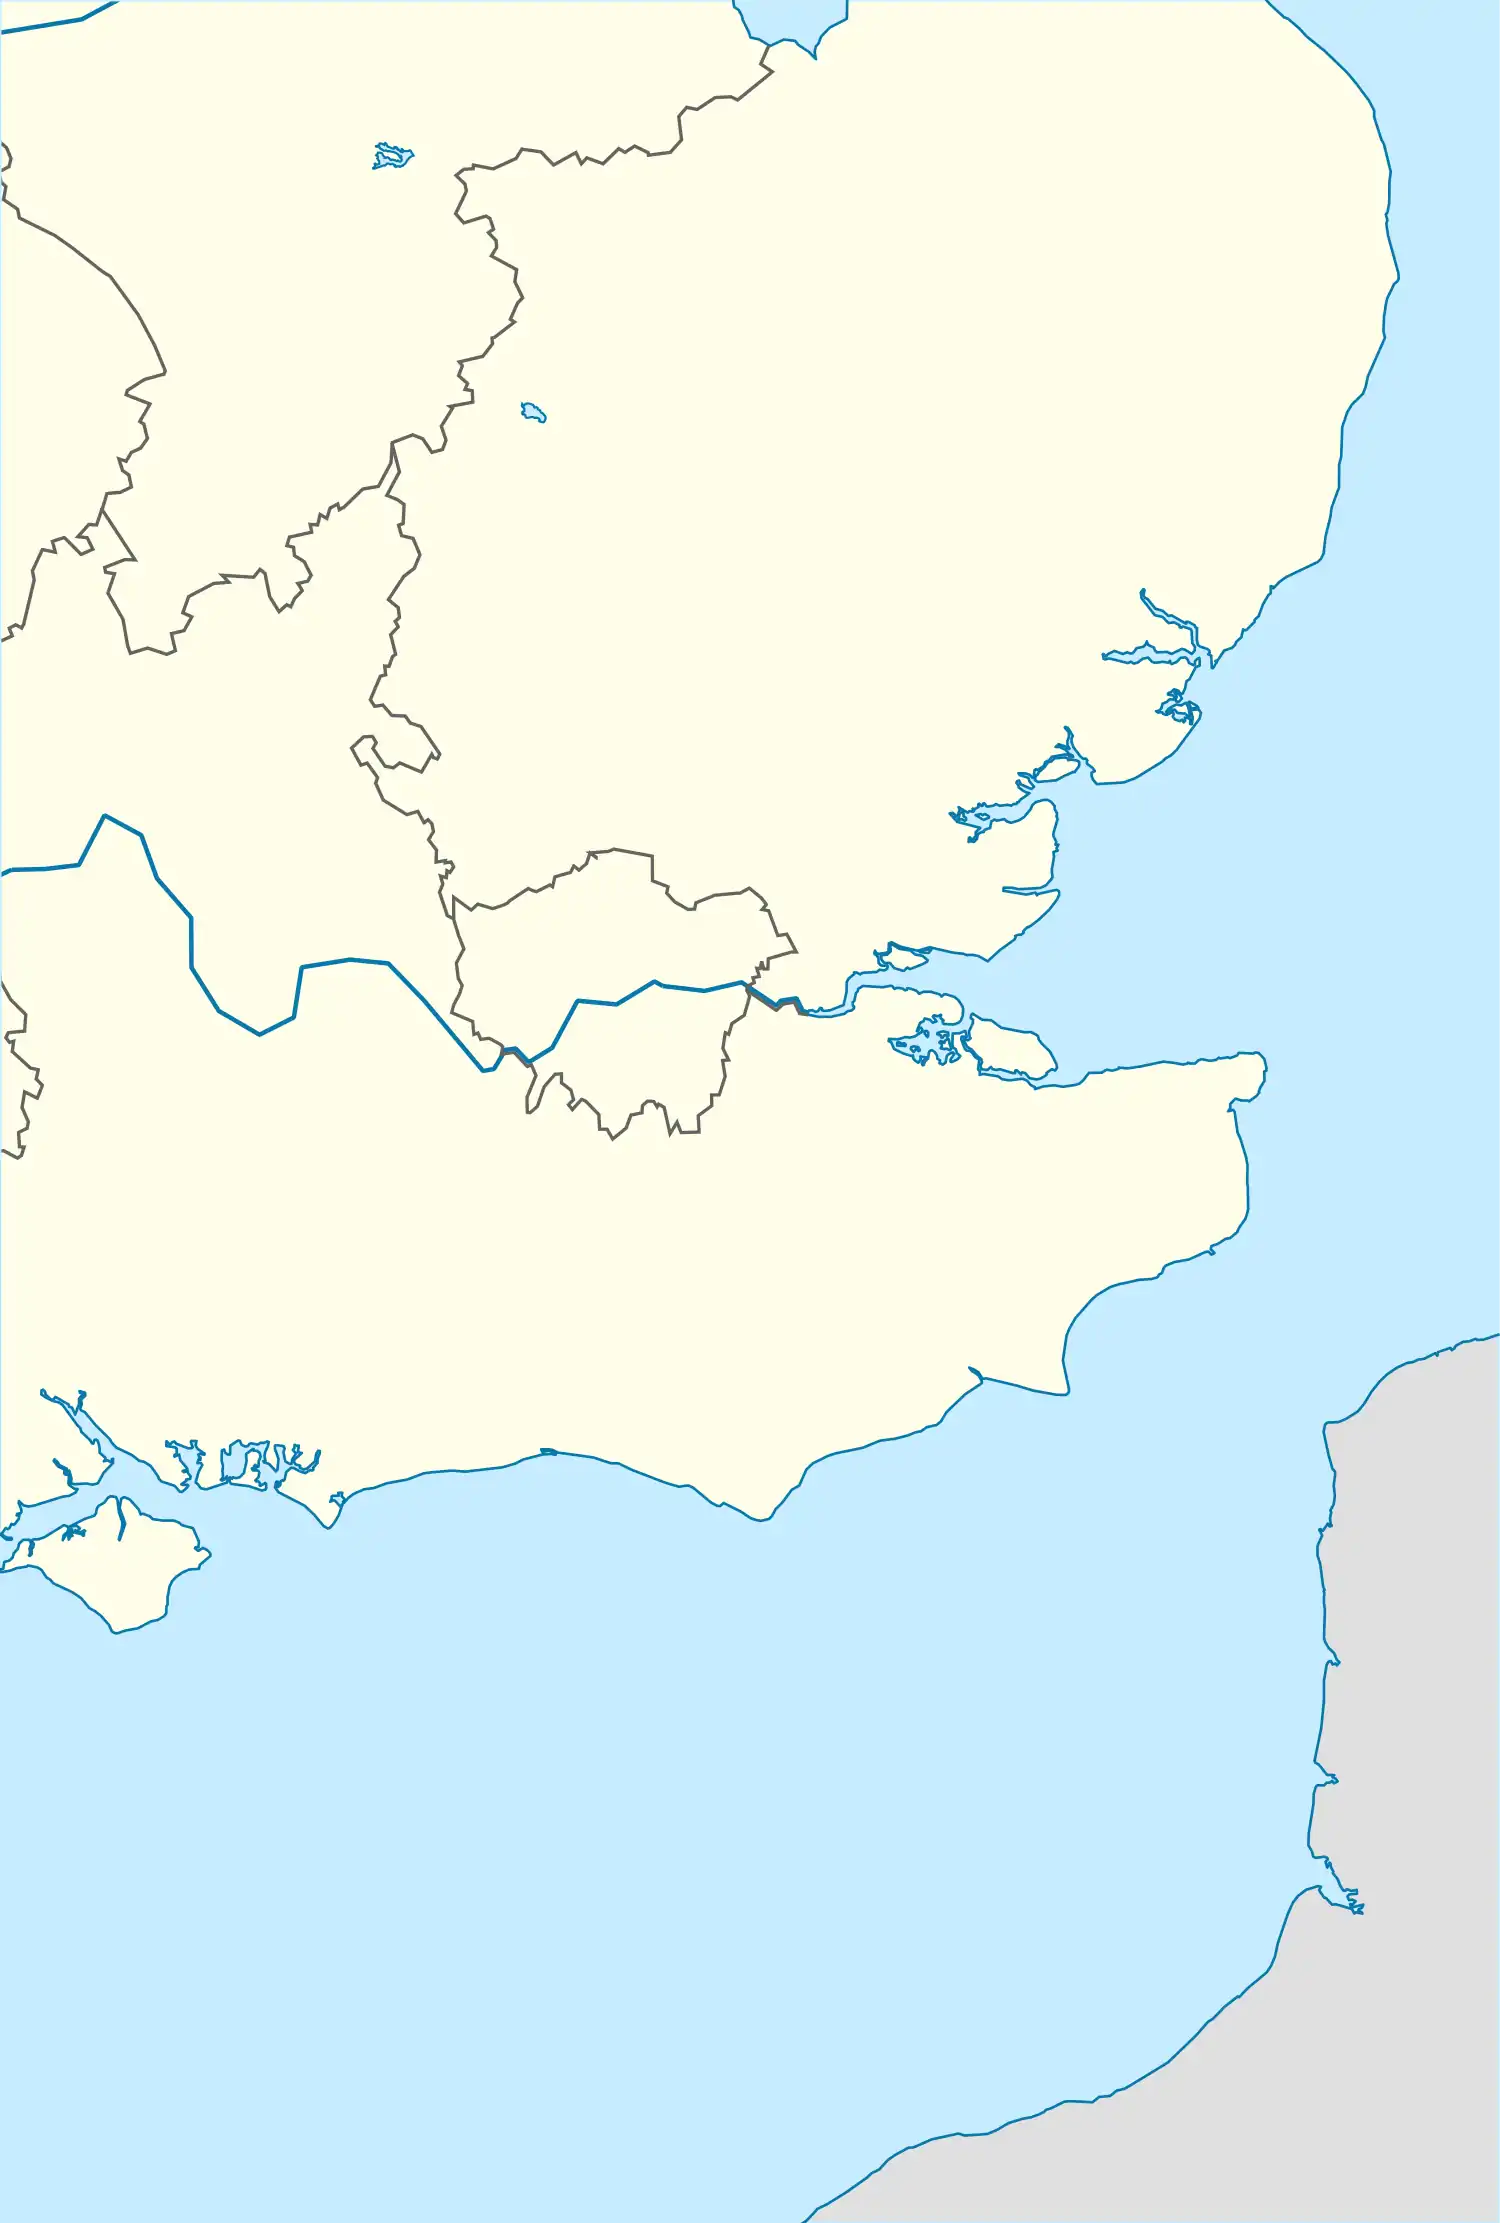 2012 Summer Olympics torch relay is located in Southeast England